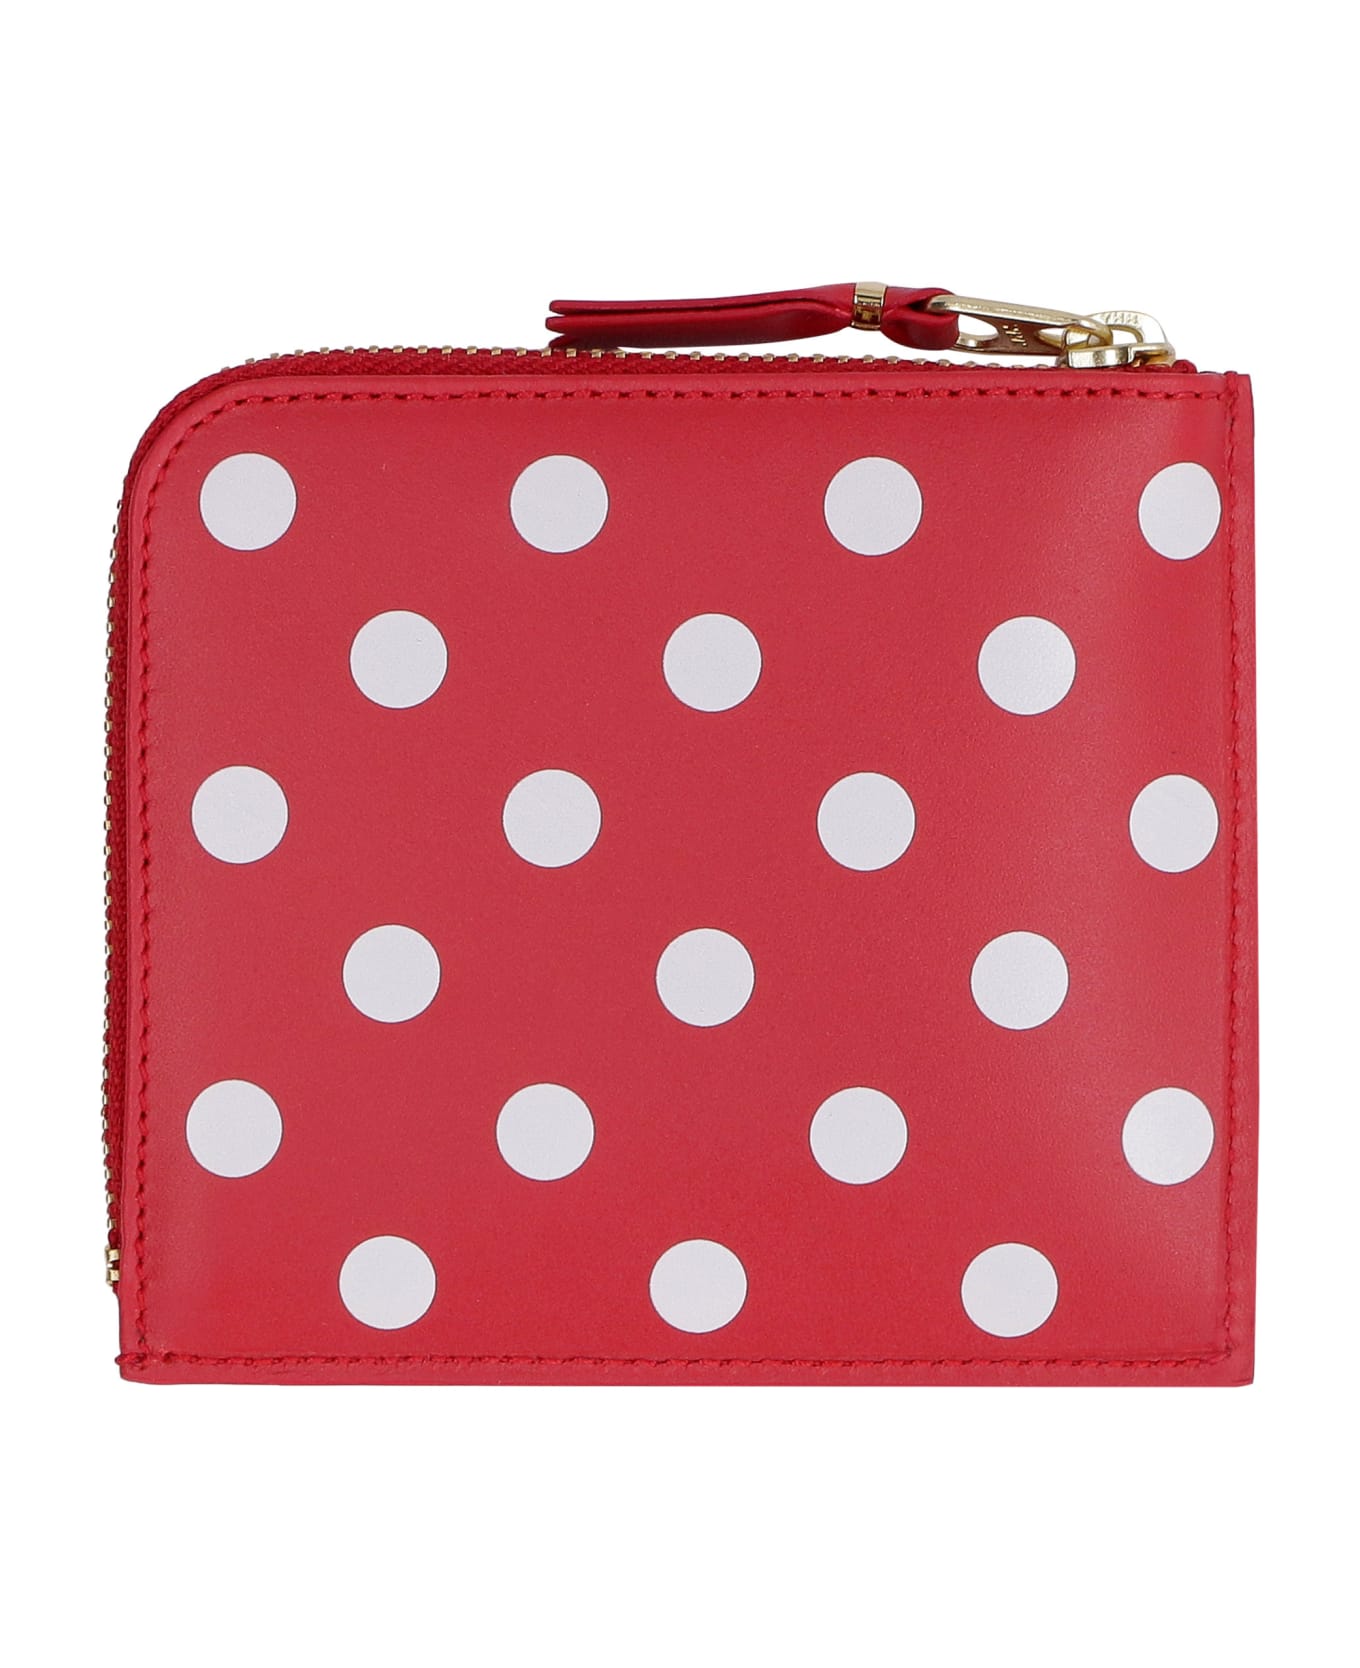 Comme des Garçons Wallet Leather Zipped Coin Purse - Red Red